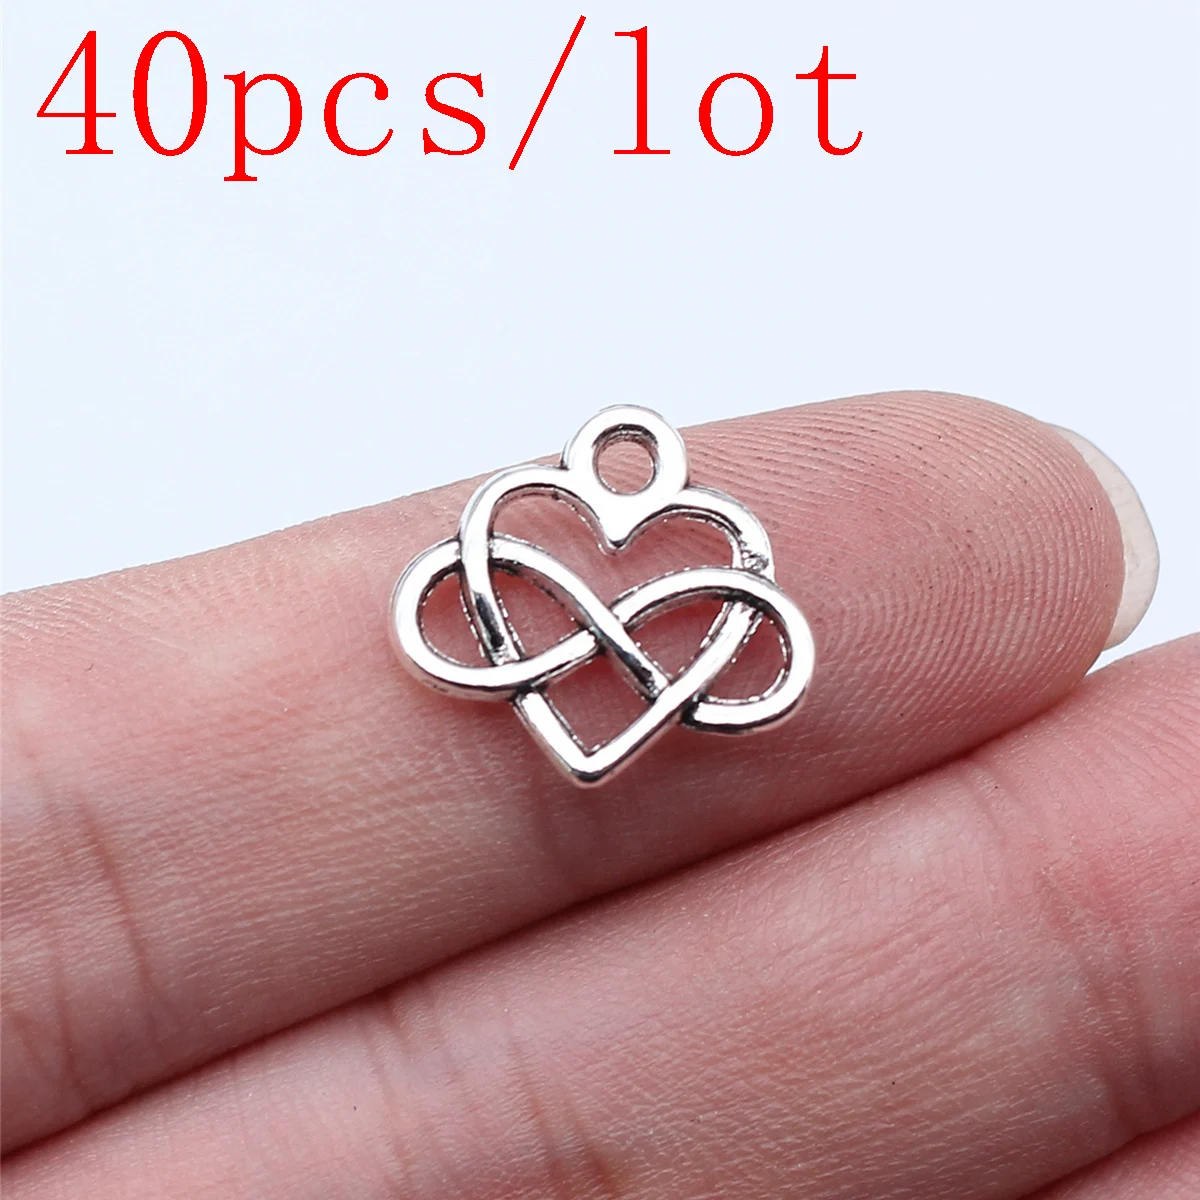 

40pcs Infinity Symbol Heart Charms Necklace Wholesale Jewelry Making Supplies 15x14mm Antique Silver Color